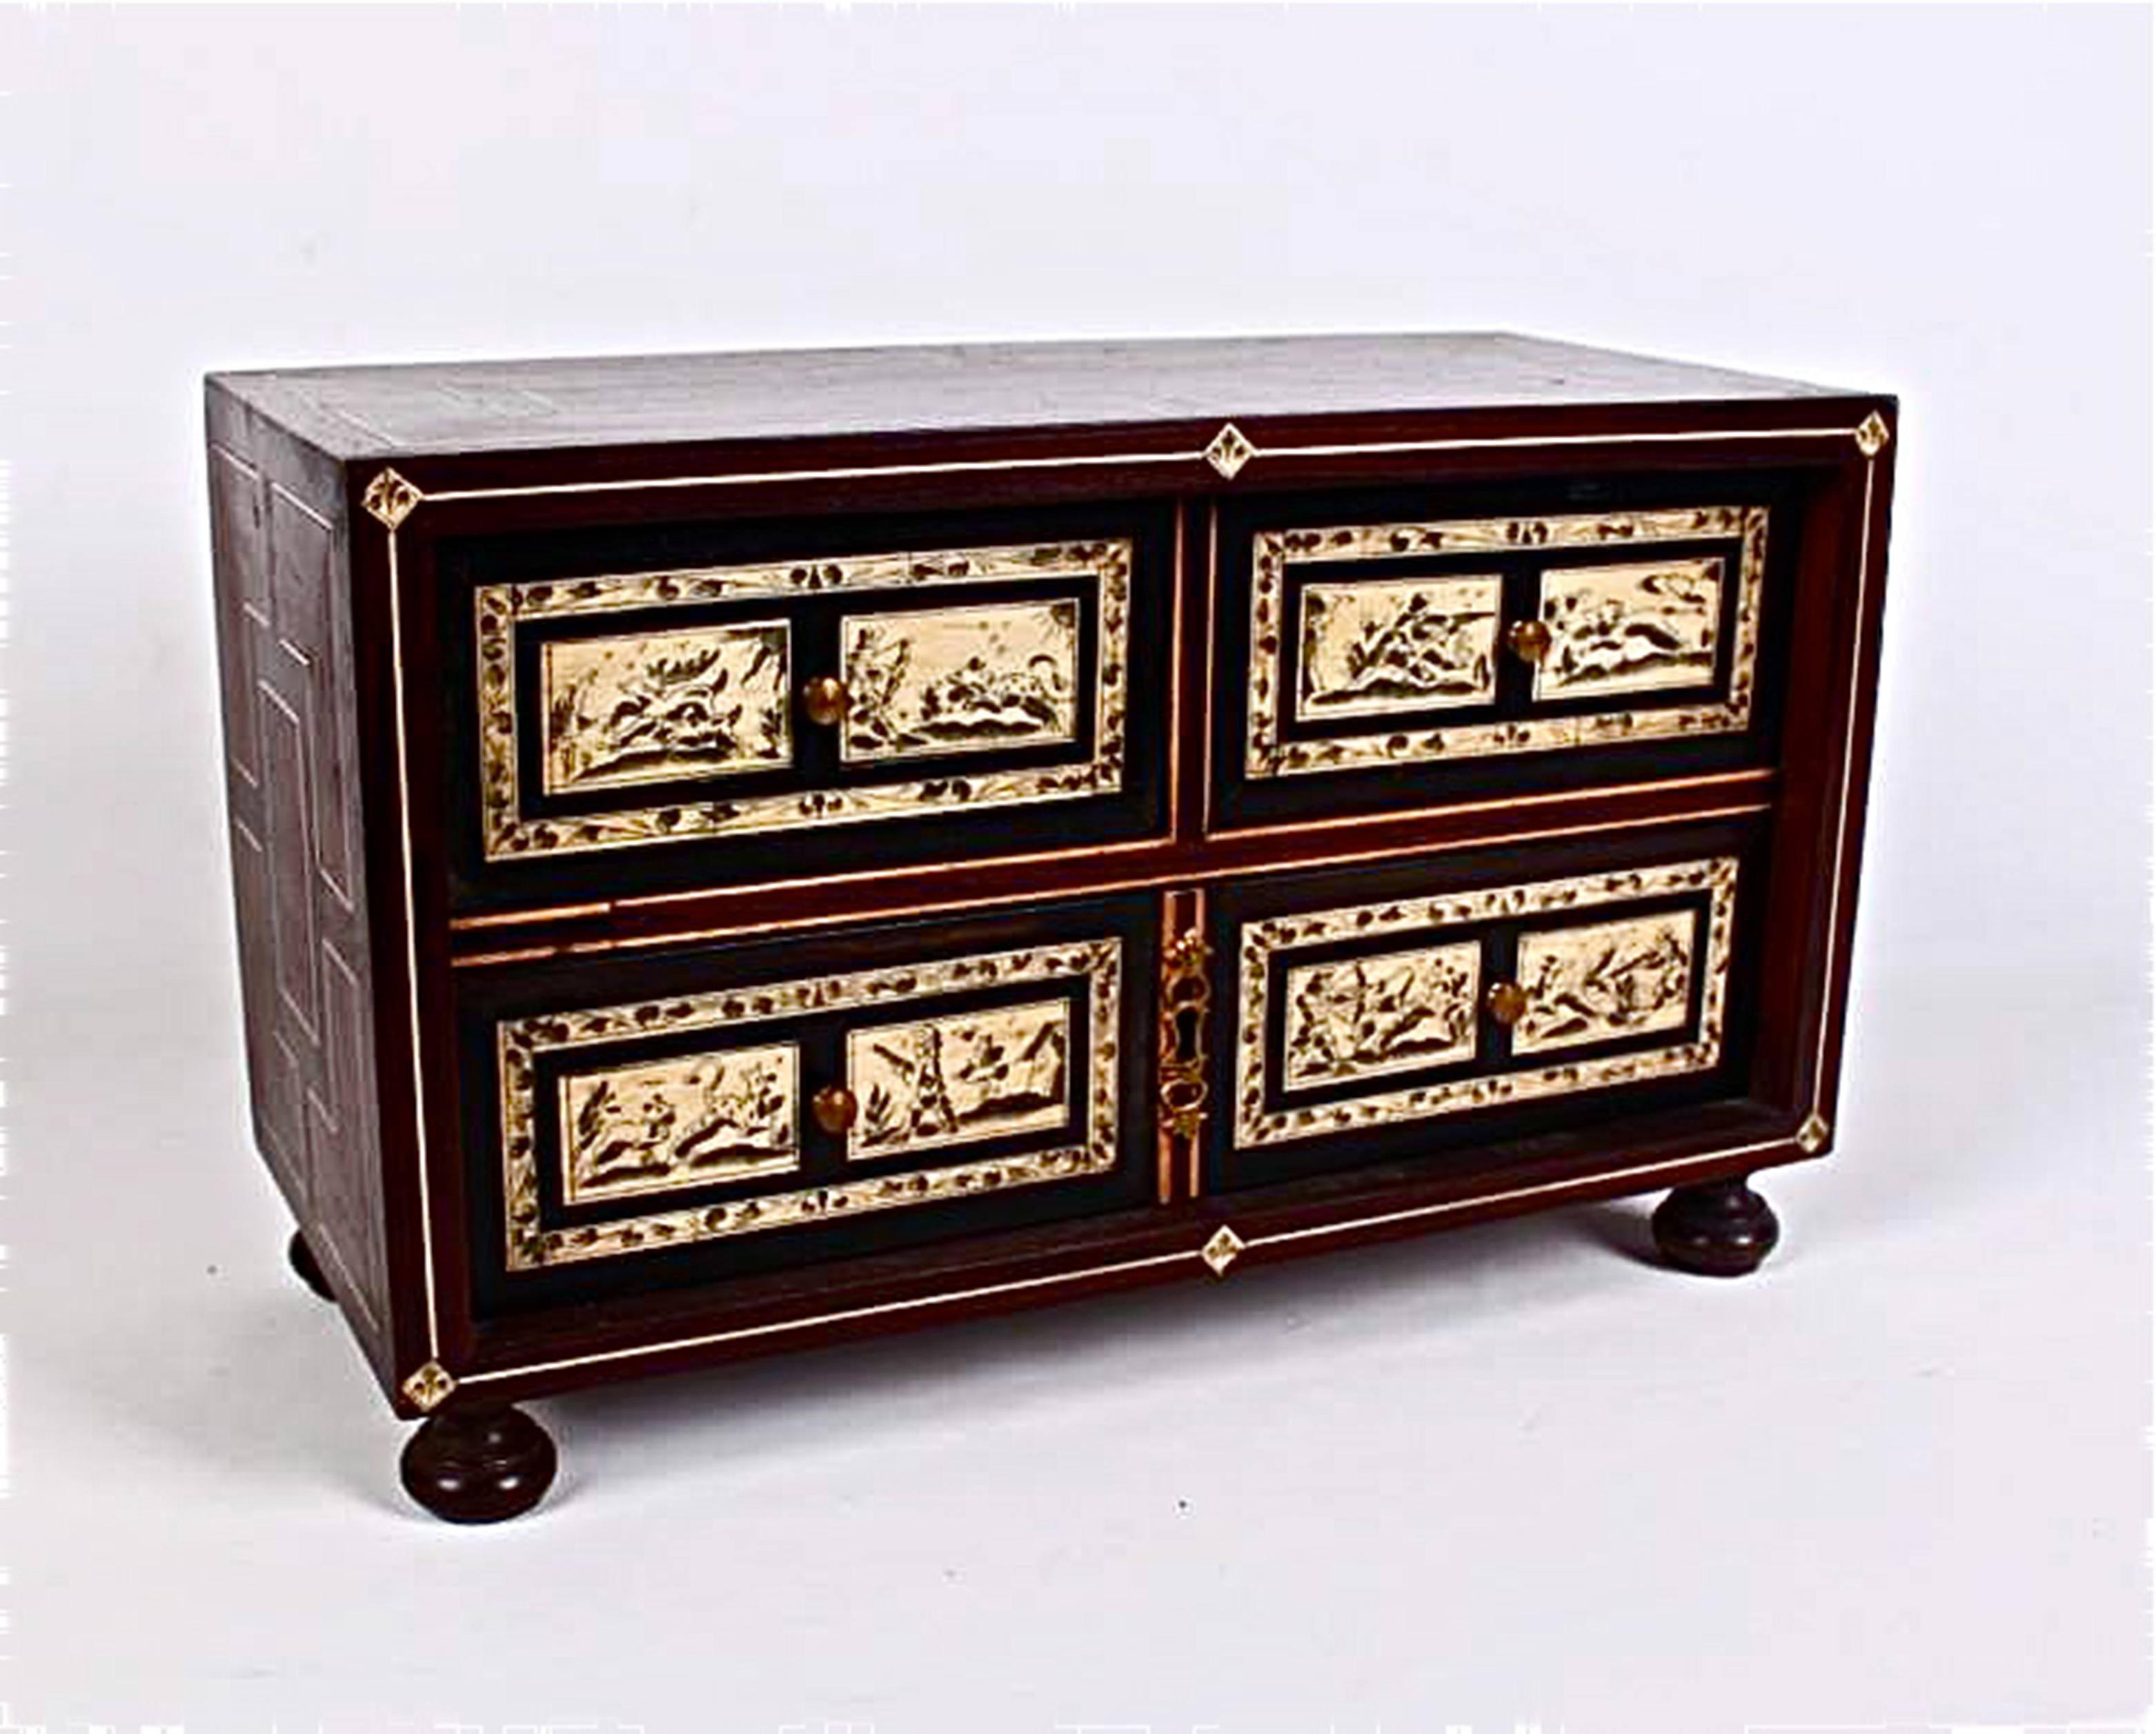 A late 19th century or early 20th century Neapolitan parquetry table cabinet in rosewood, mahogany, walnut and bone. The cabinet with three drawers, one large on the base and two small drawers on the upper tier.  The bone plaques incised with